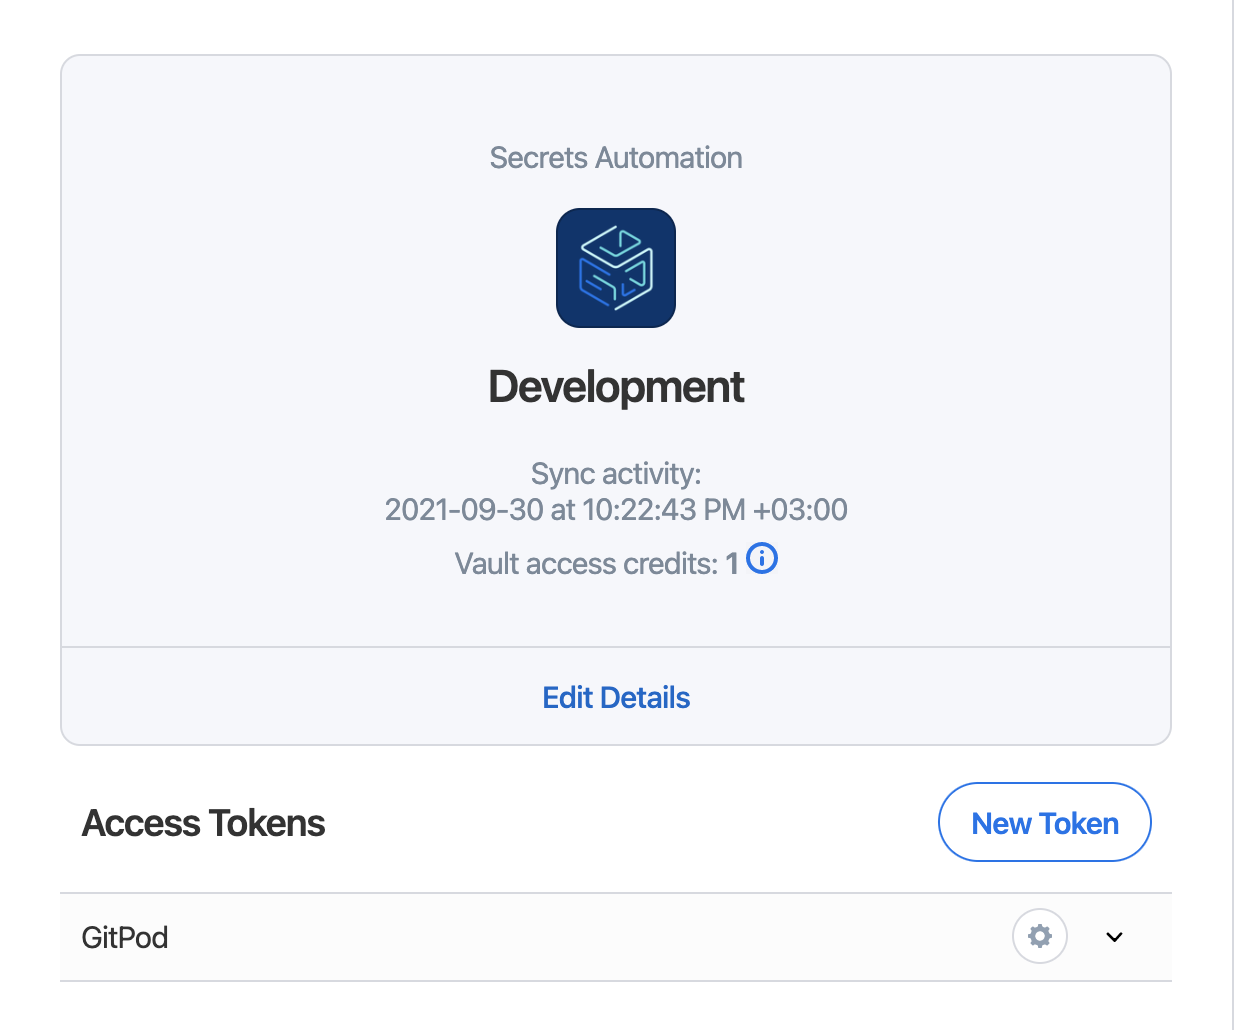 1Password Secrets Automation flow, with one Access Token named Gitpod